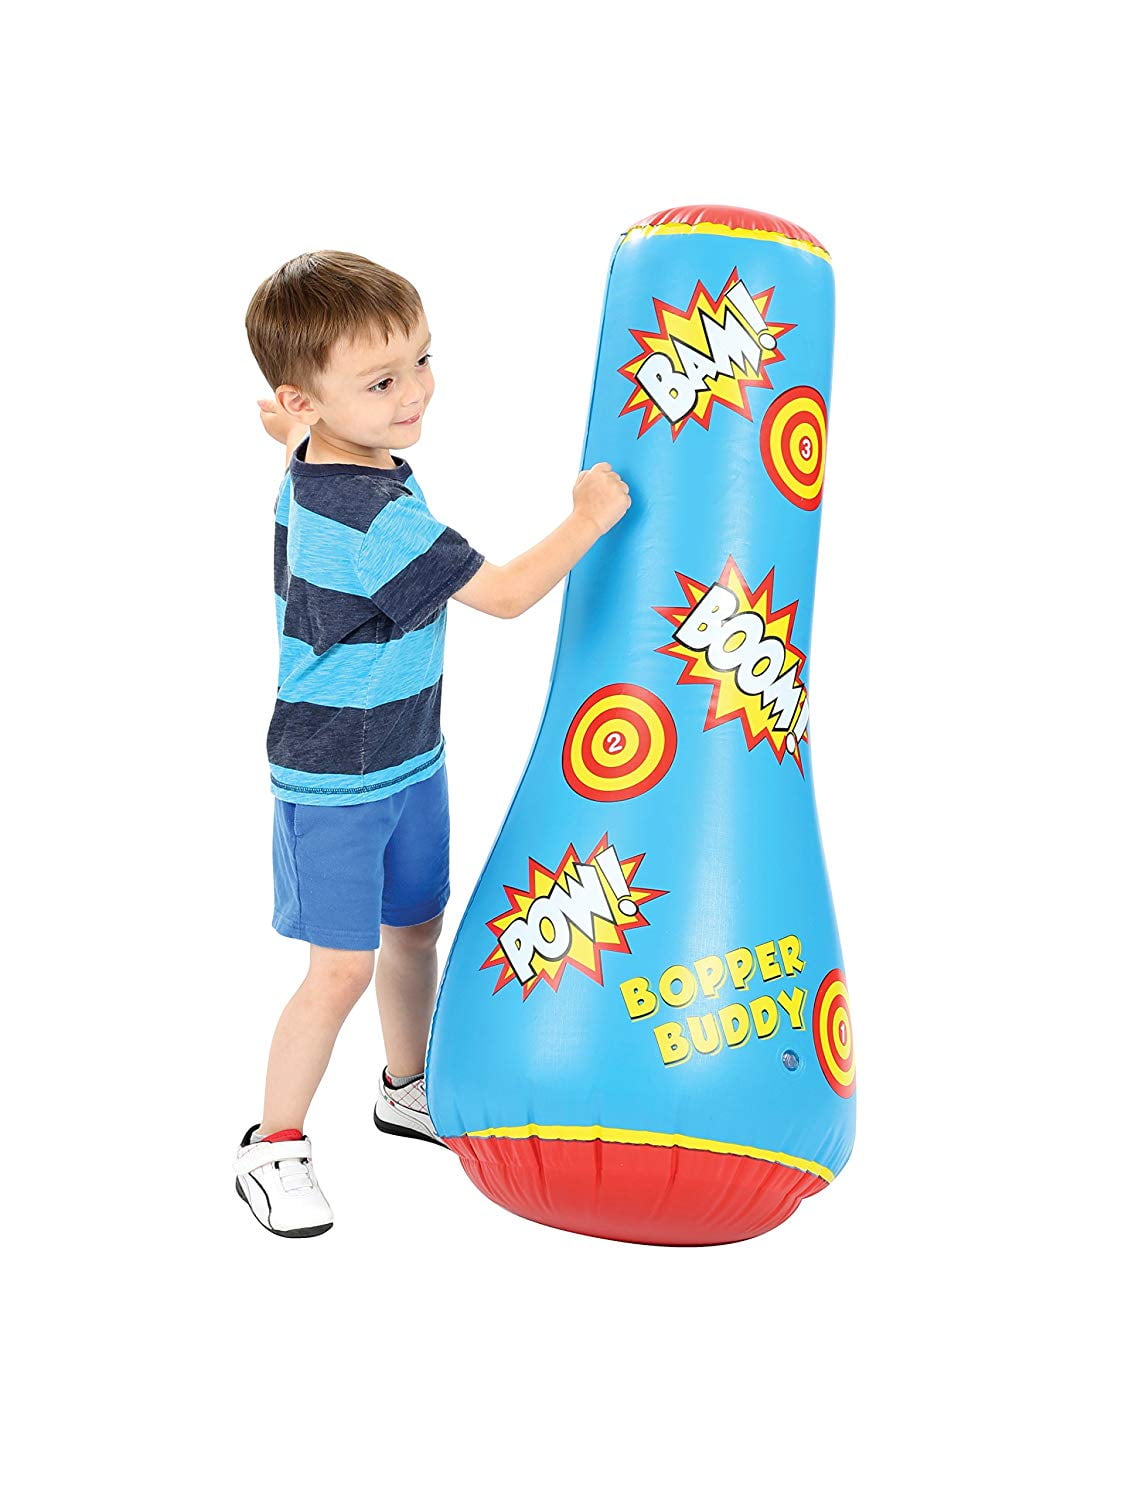 ETNA Products Inflatable Punching Bag for Kids, Free Standing Boxing Toy, 2 Pack